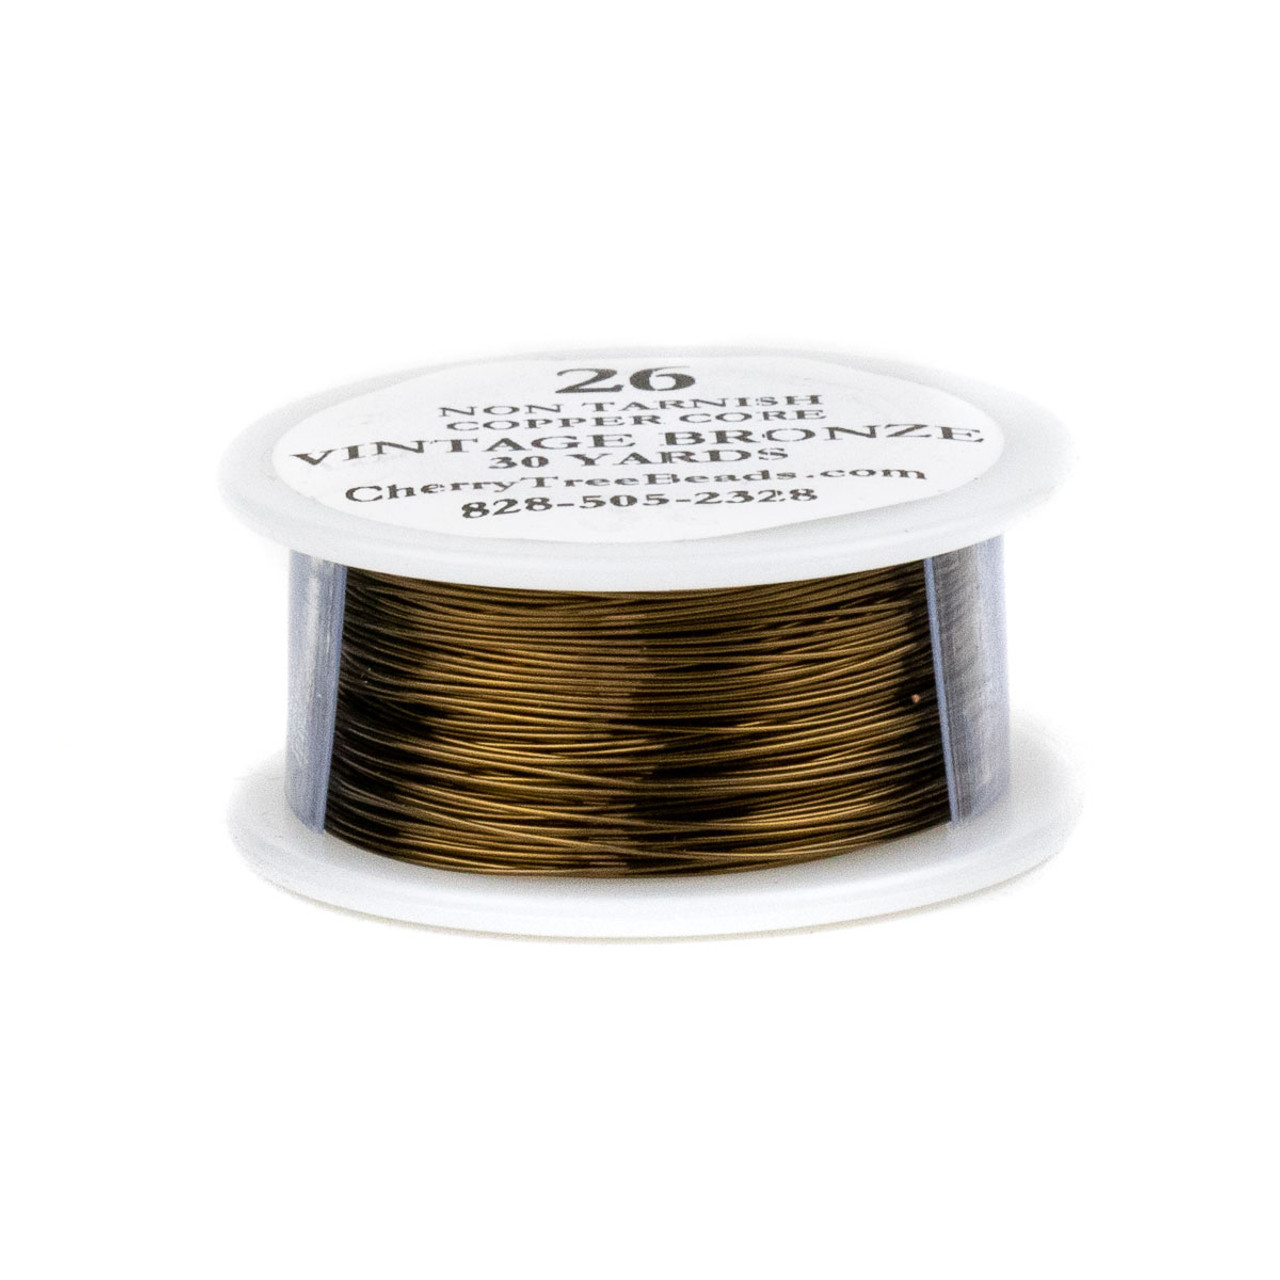 24 Gauge Coated Tarnish Resistant Antique Copper Wire on a 20 Yard Spool